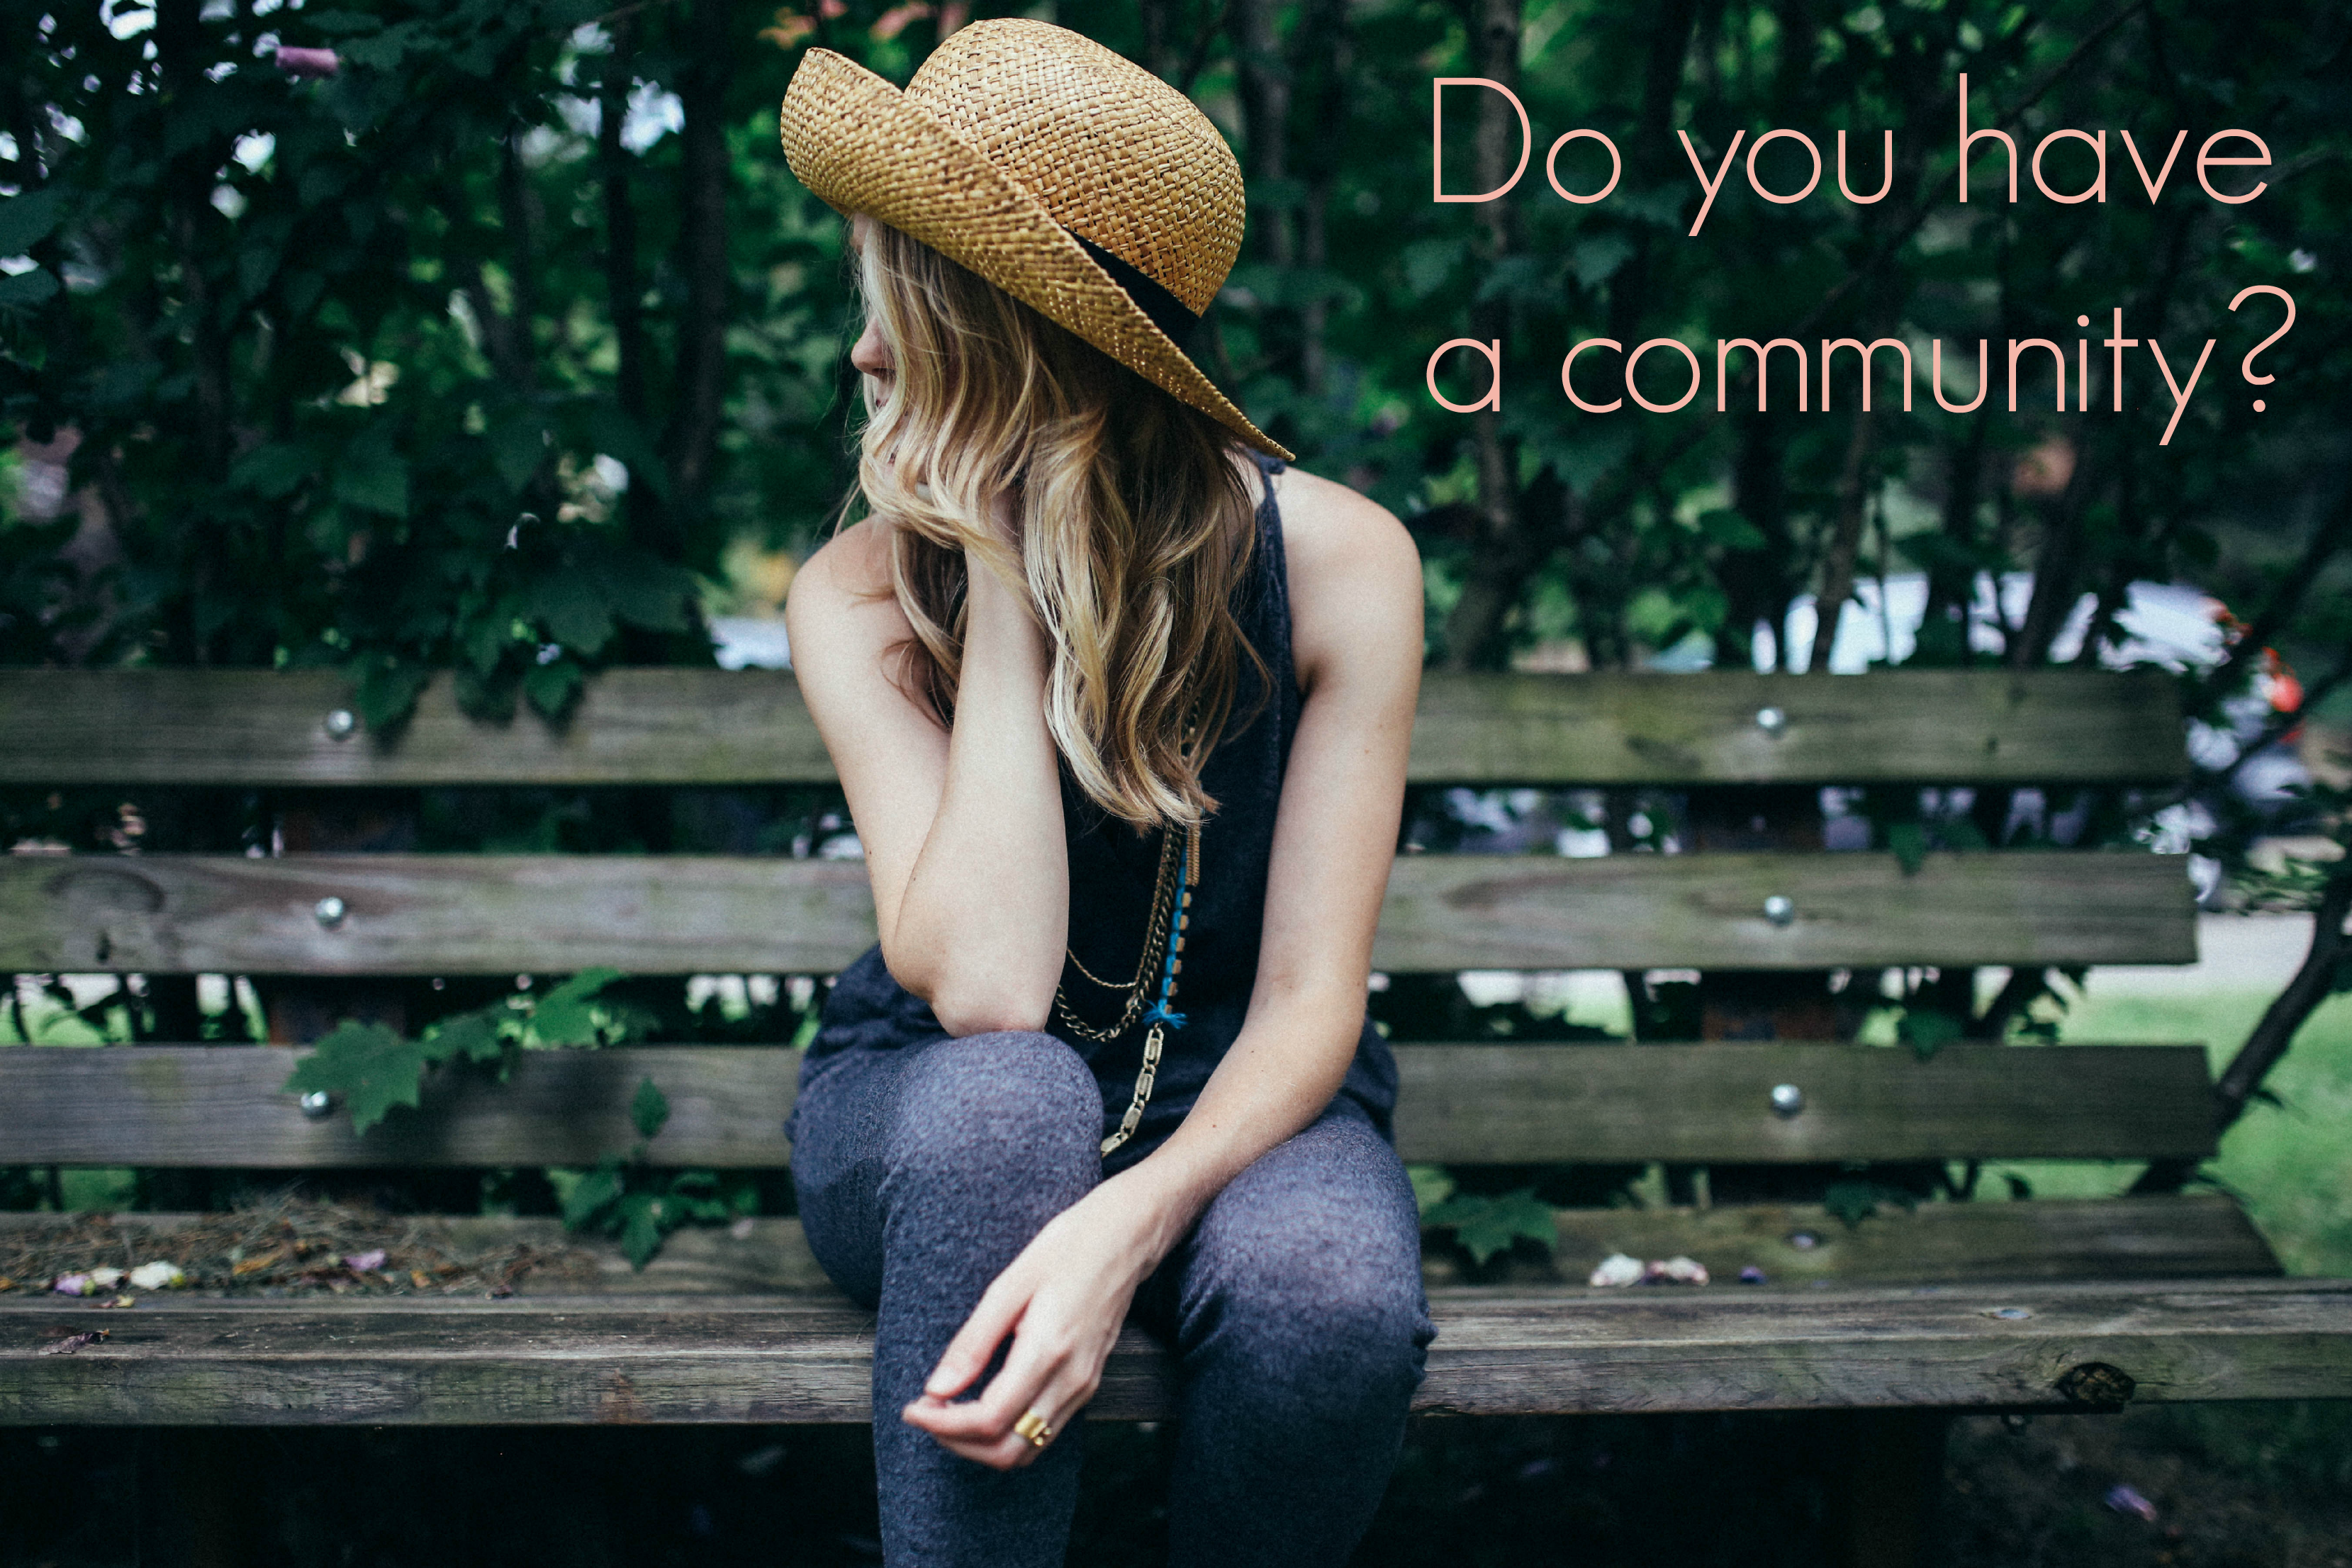 Do you have a community?